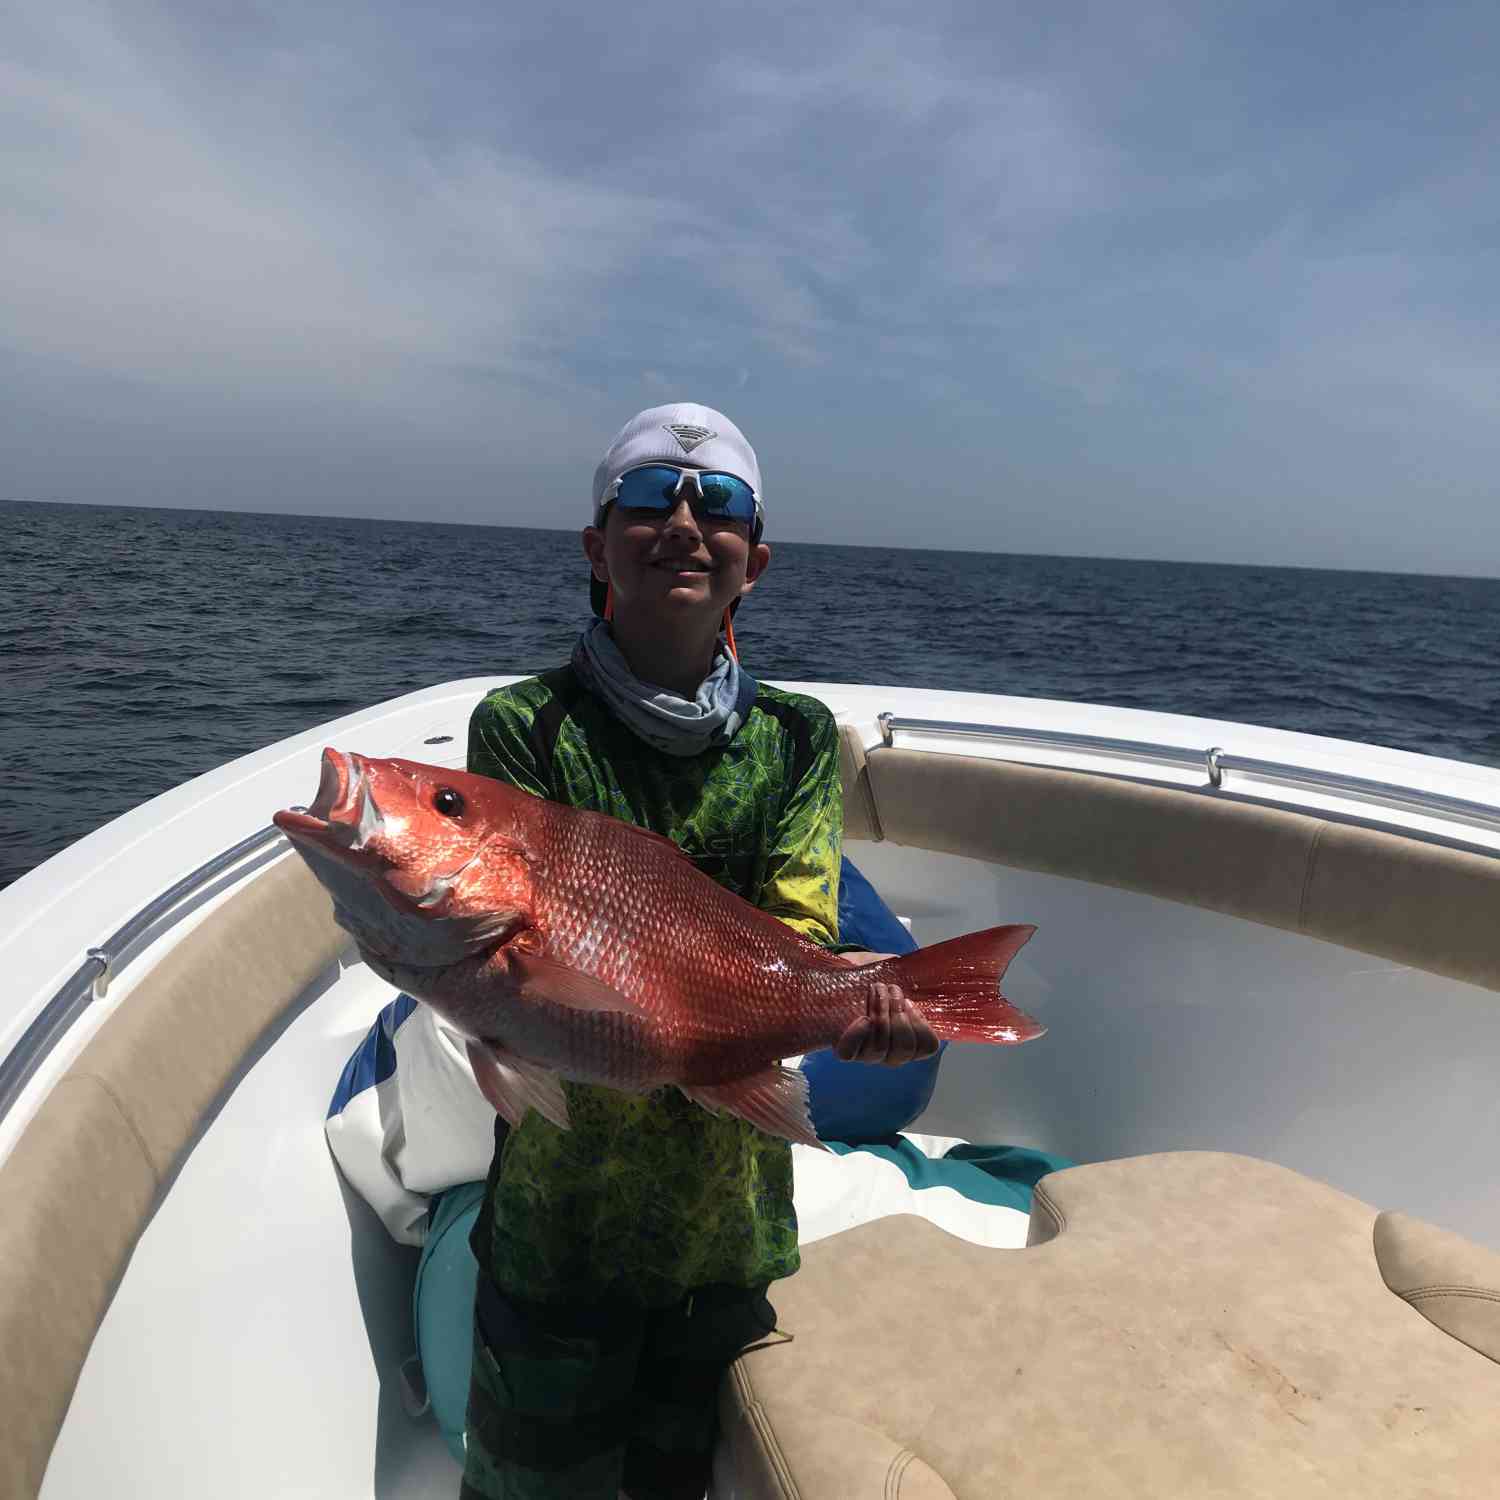 He was super excited to reel in this beautiful red snapper!